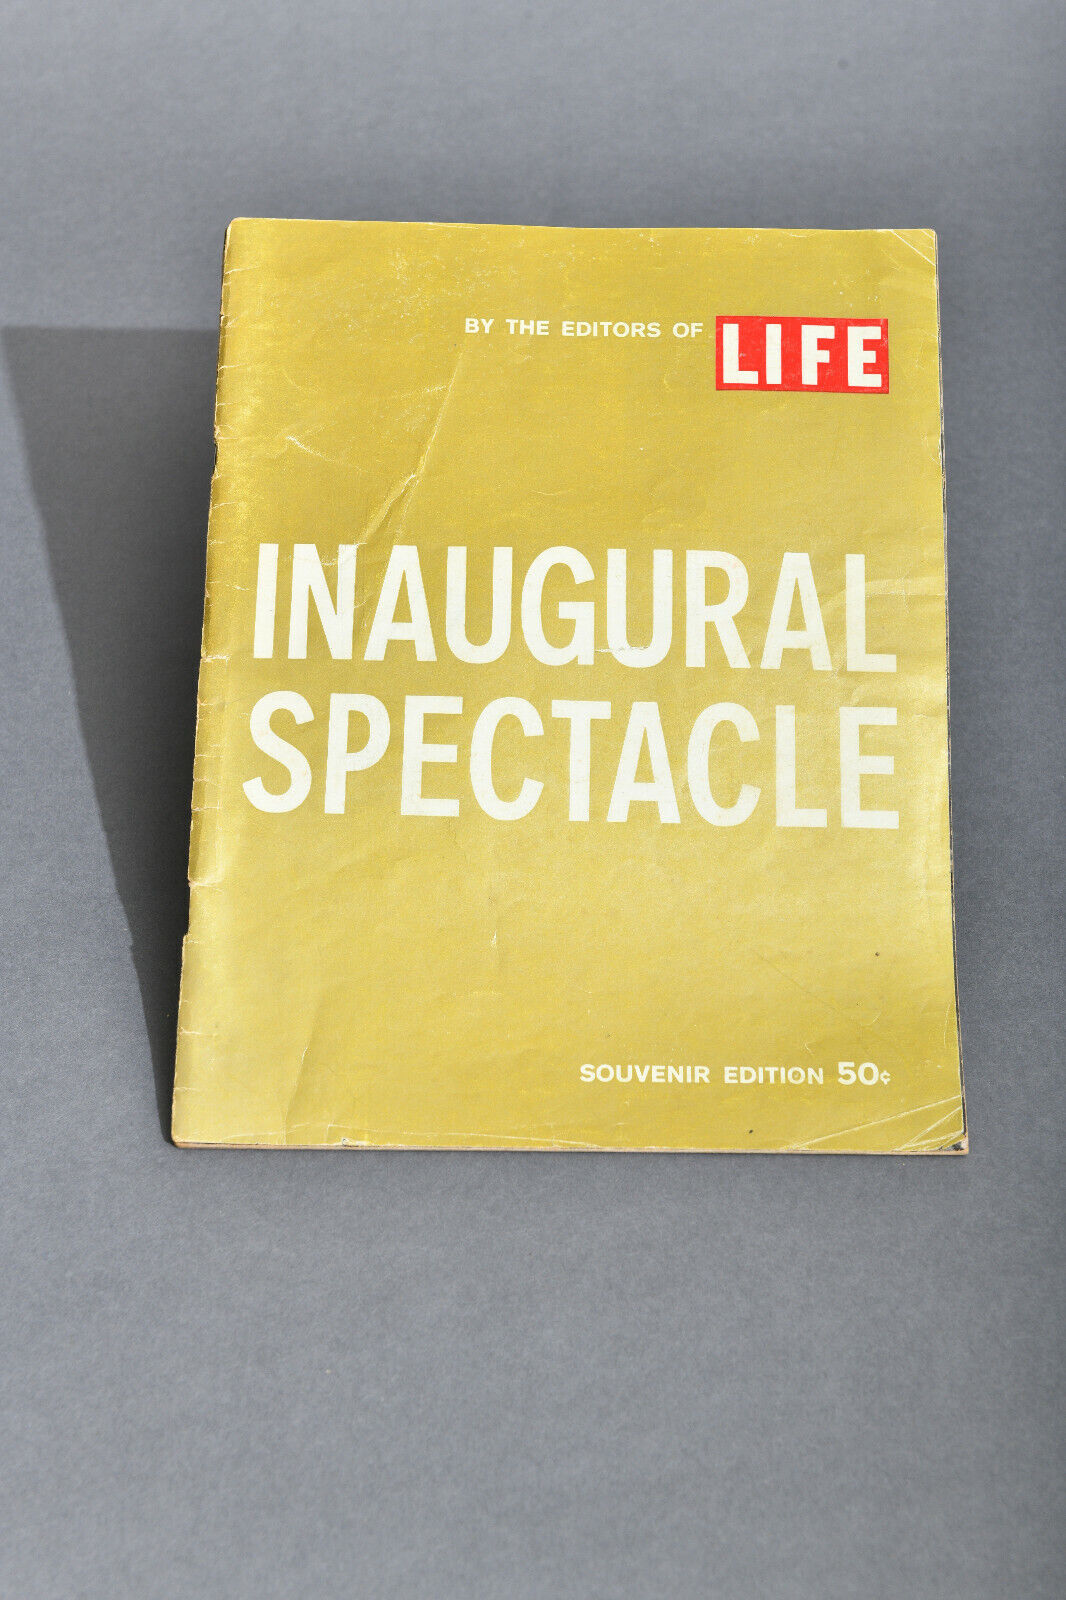 Vintage 1961 Life Magazine J.F. Kennedy “Inaugural Spectacle” Souvenir Edition  